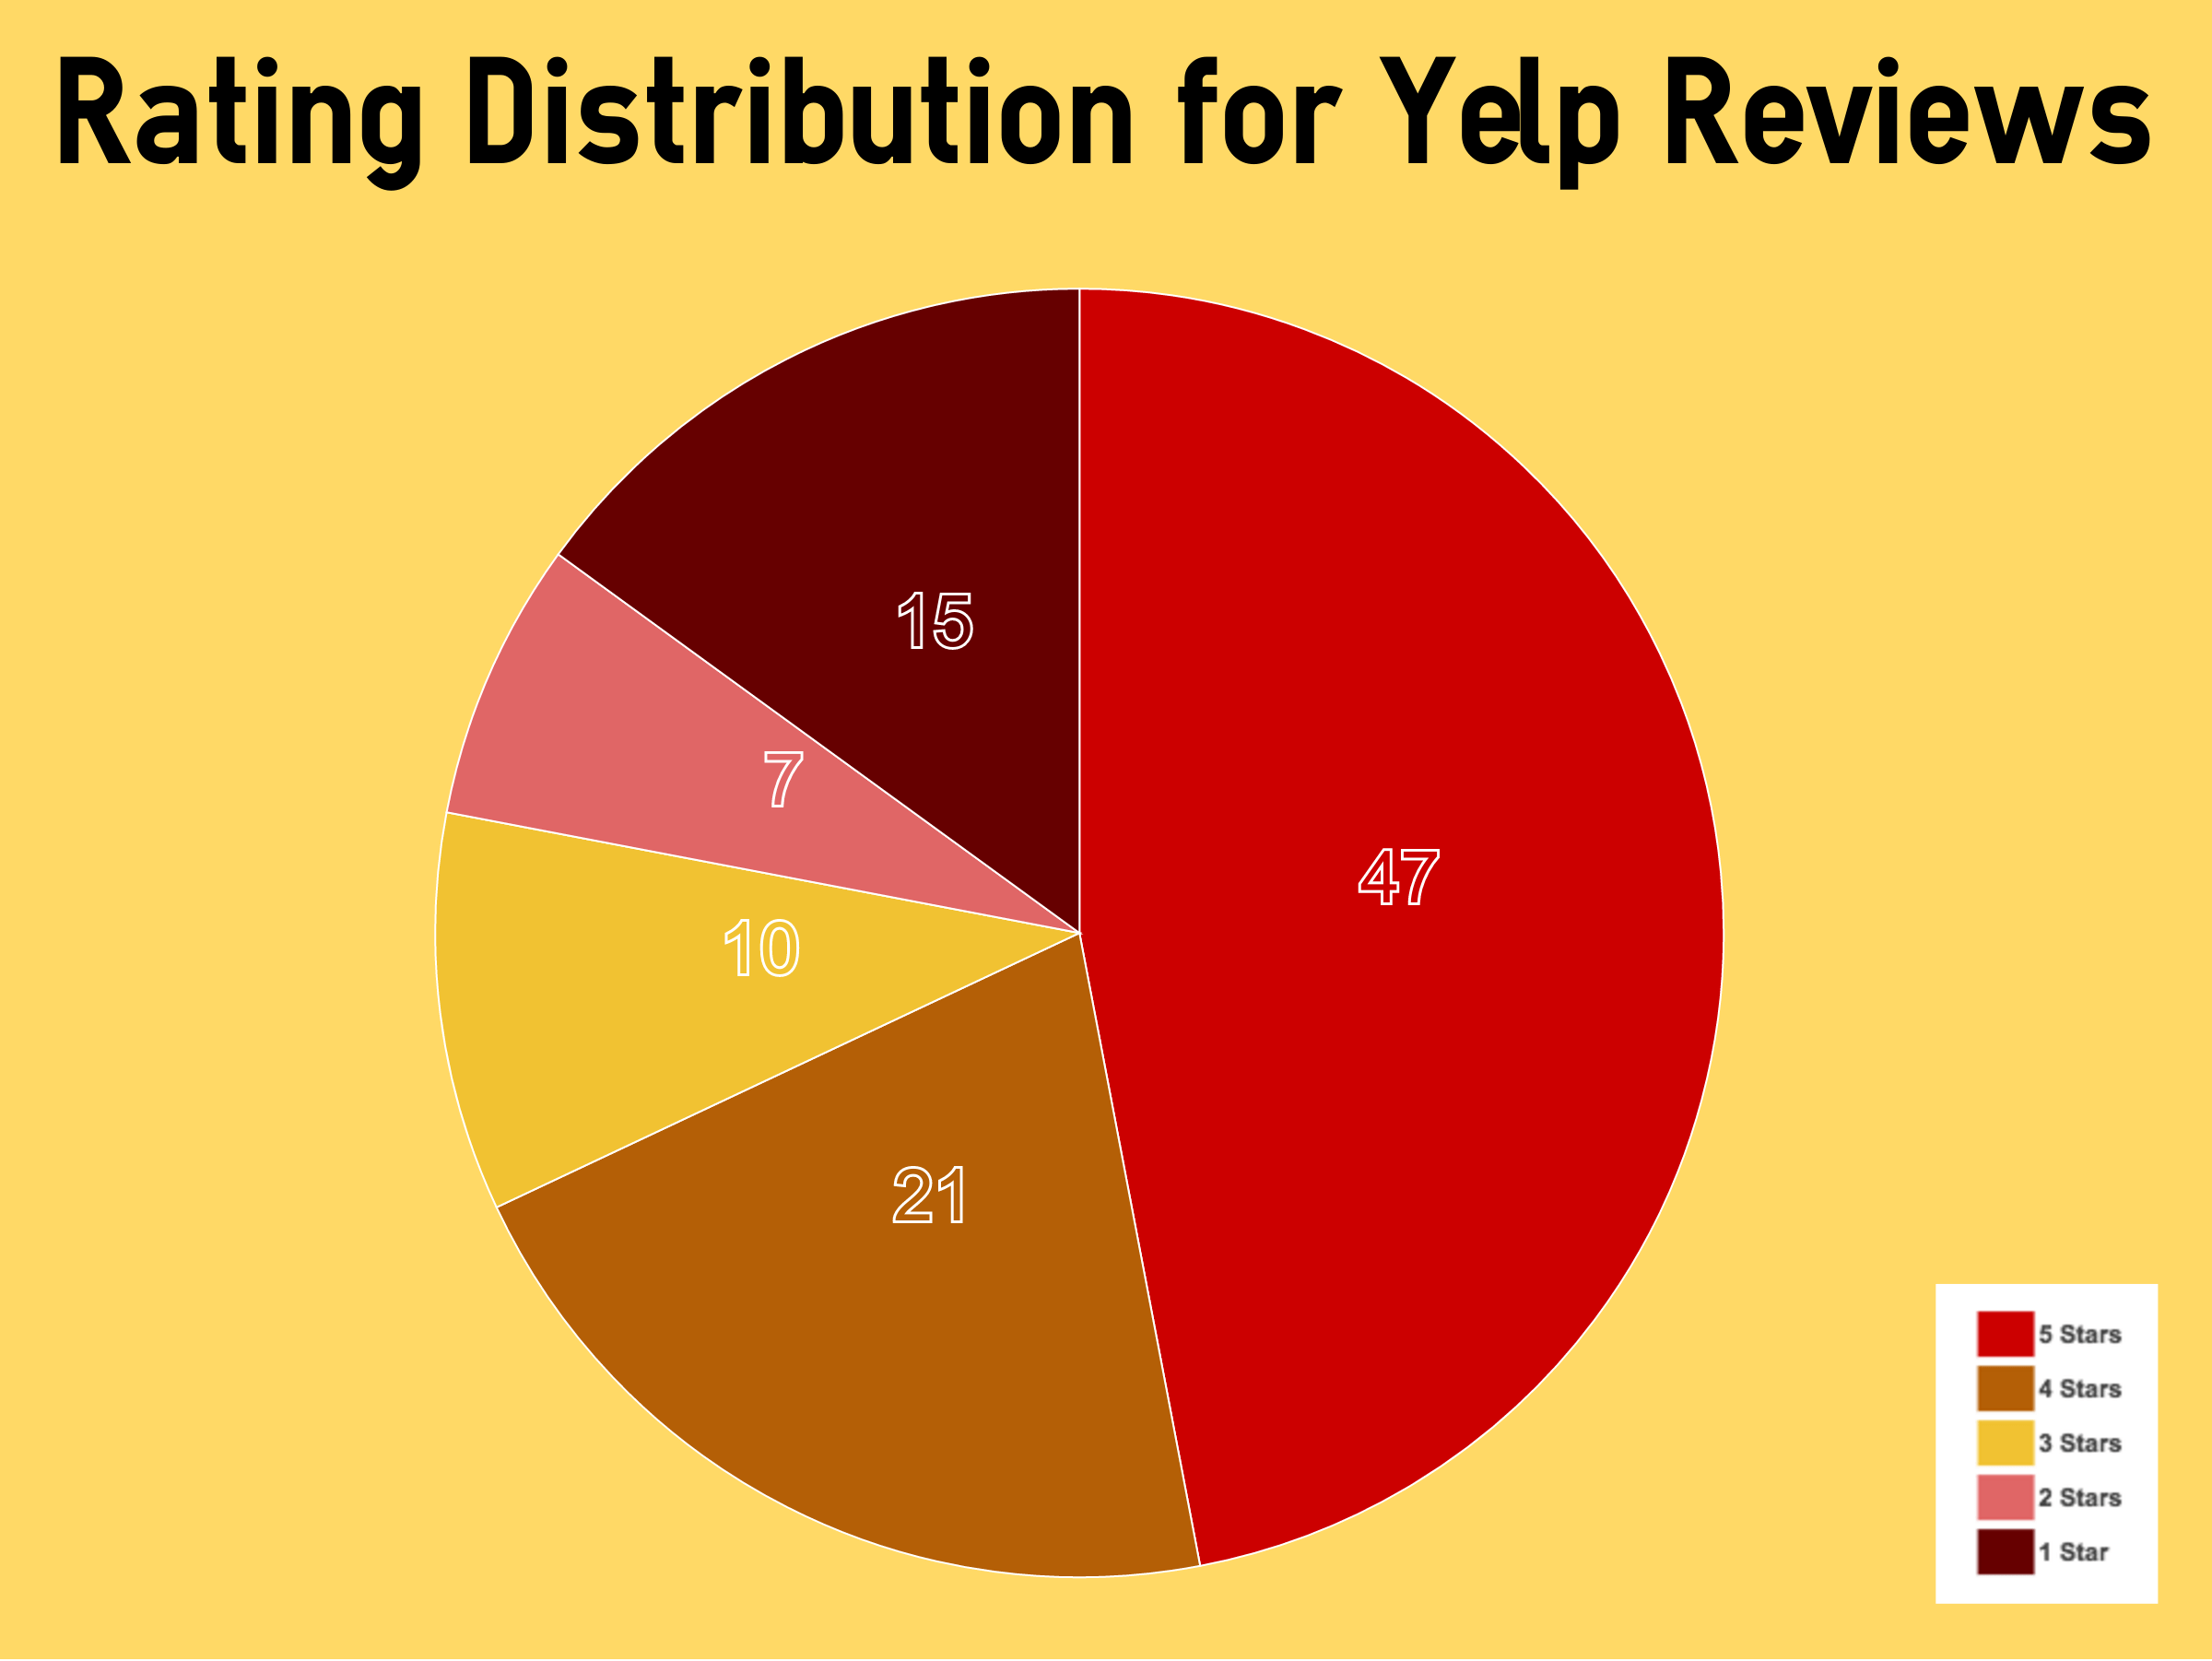 Red 5 Stars Yelp Review Logo - How To Handle 1 Star Reviews